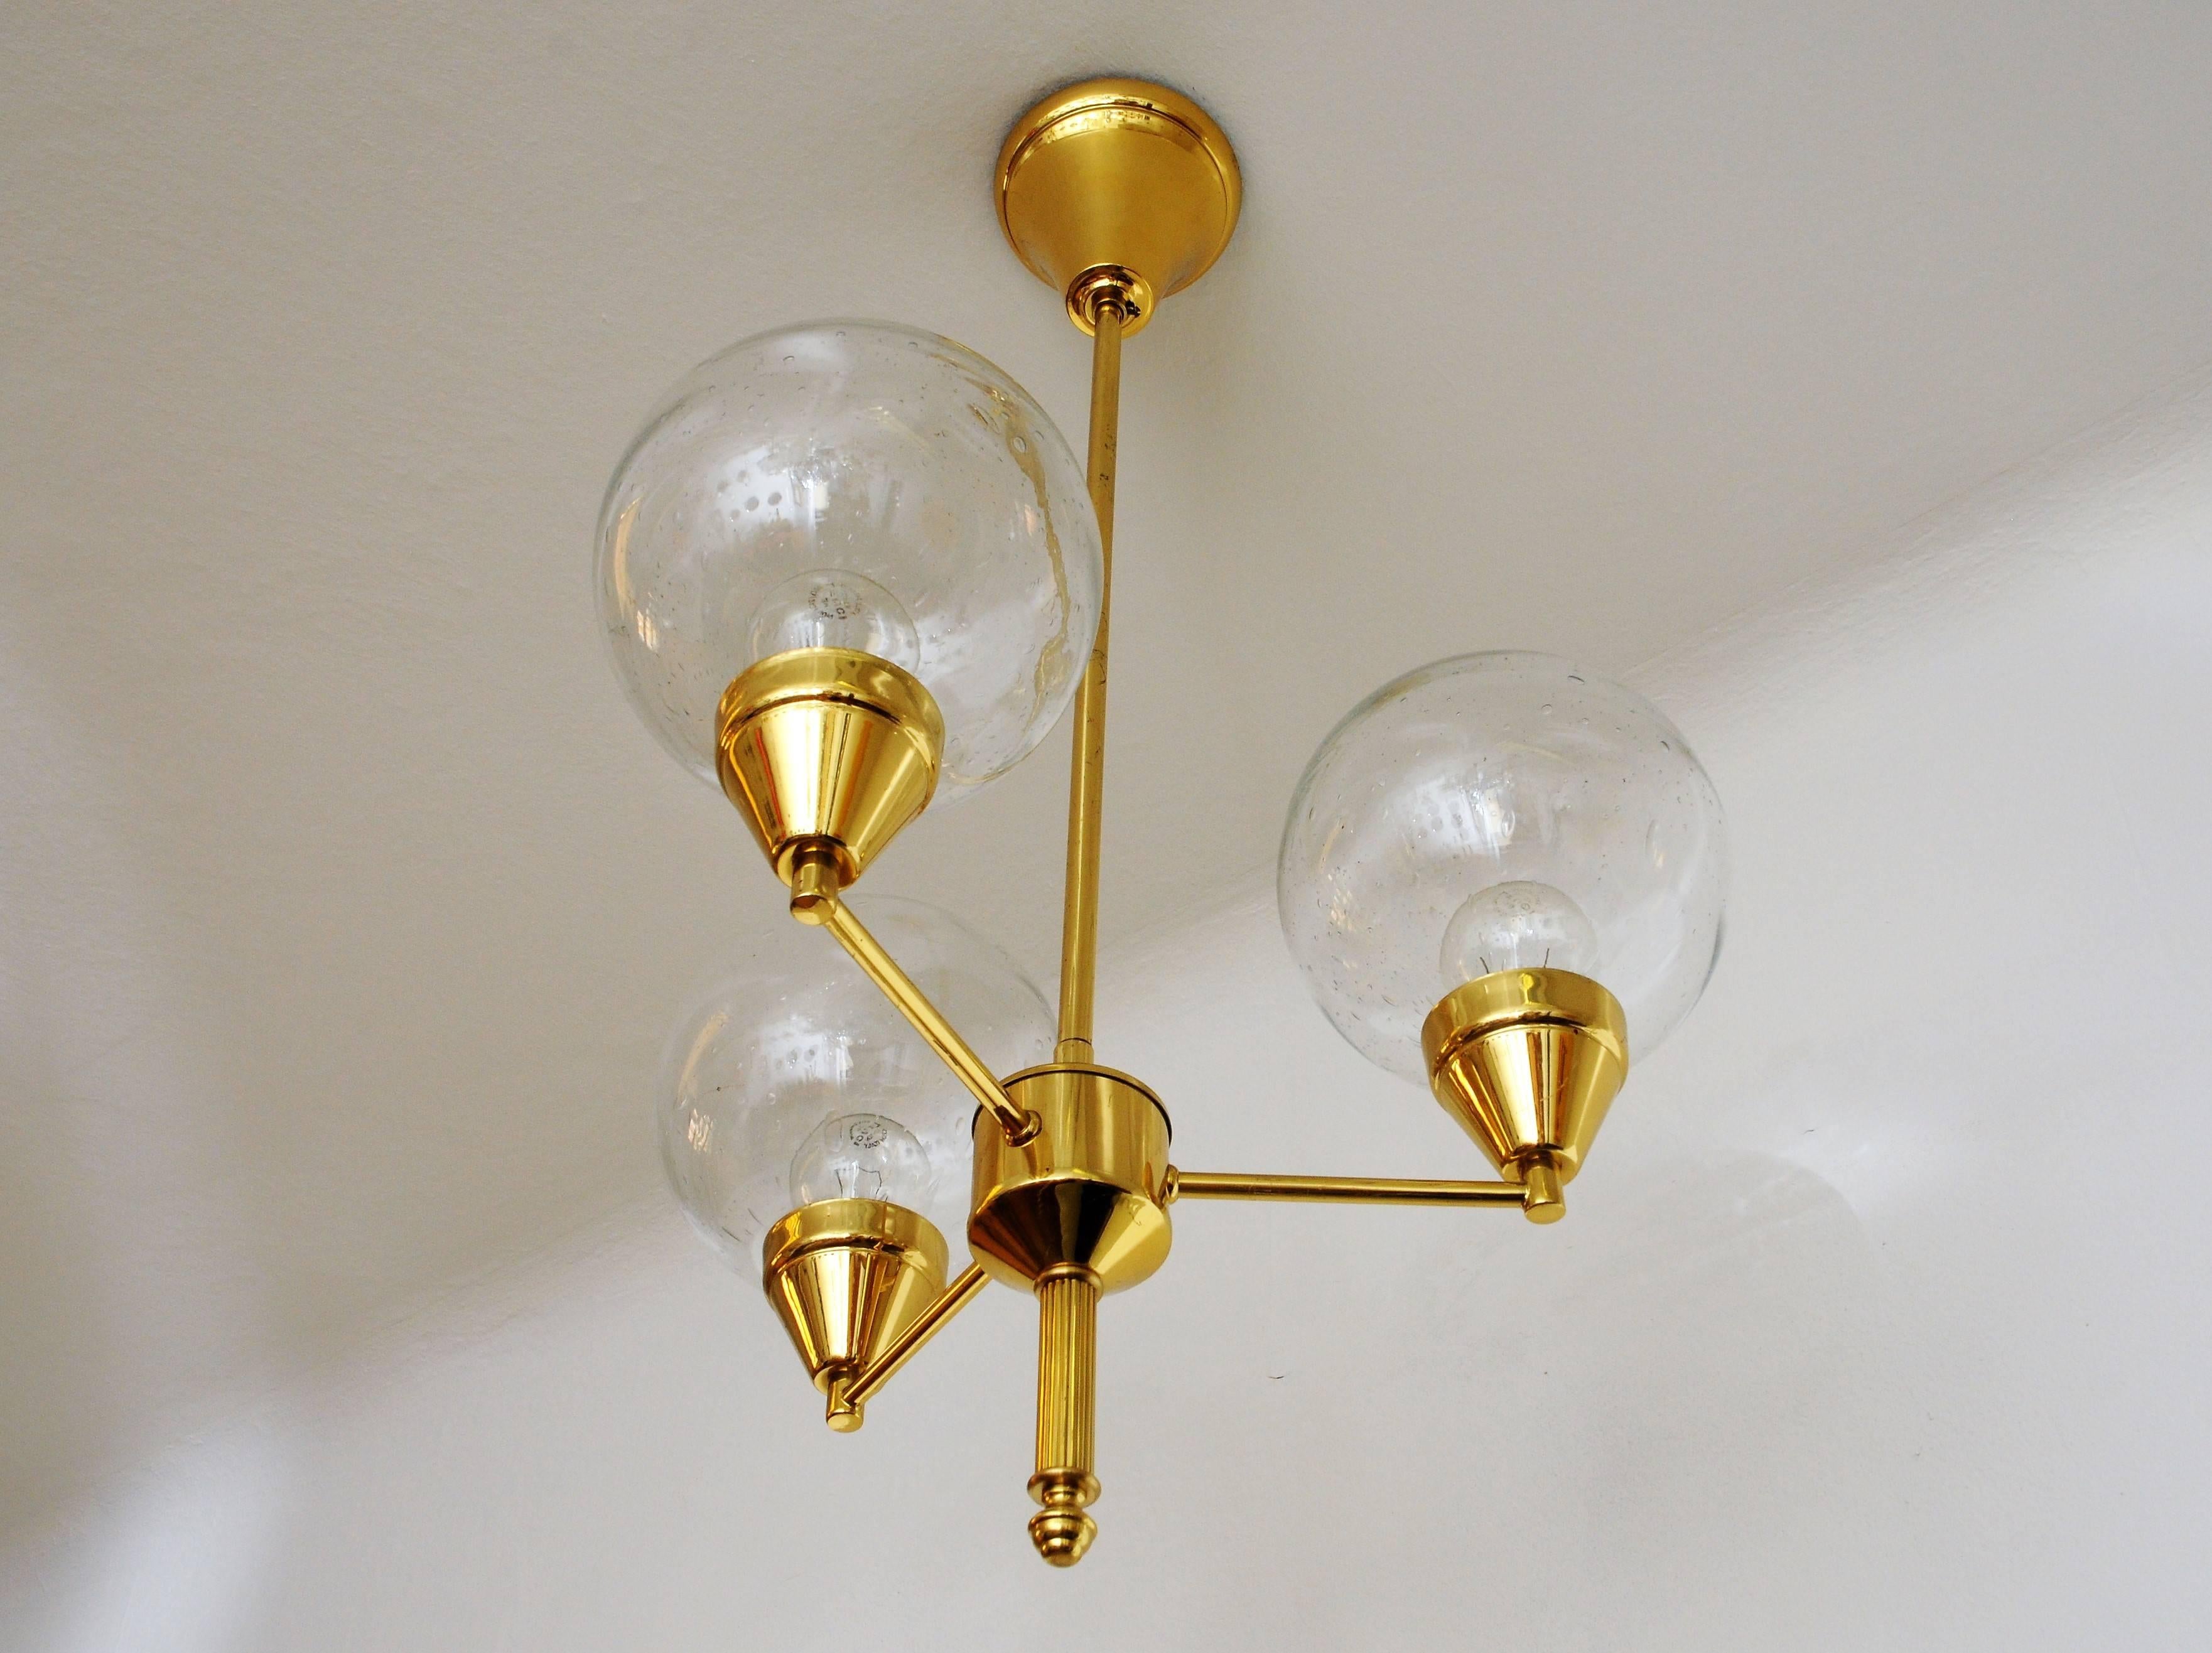 Scandinavian Modern Brass Ceiling Lamp with Three Clear Glass Domes 1960`s - Sweden